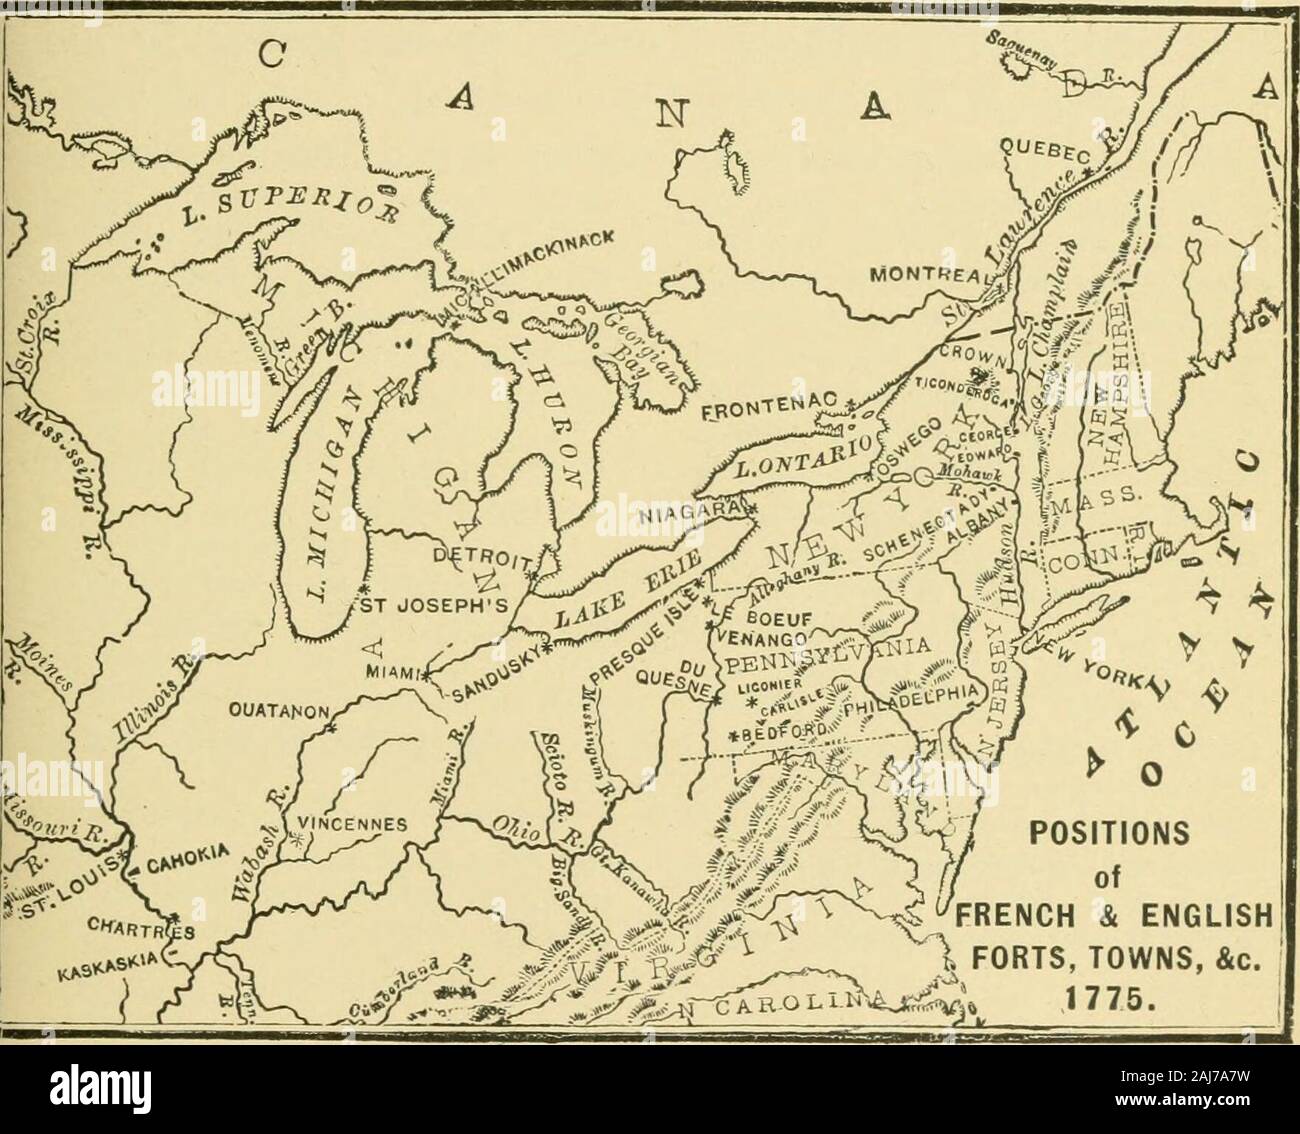 The making of the Ohio Valley states, 1660-1837 . tendencies of the American people. This vanguardw^as only waiting for the signal, to move down into theOhio Yalley. A third project more nearly concerns the founding ofKentucky, to which, indeed, the others looked, but didnot attain. This was known as Hendersons Purchase, from theleading spirit in it, later as the Colony of Transylvania.^The purchase included lands lying between the Ken-tucky and Cumberland, and was made of the Cherokees,as the presumed owners, thus wholly ignoring the claimsof Virginia, as Walpoles Grant had done before it. Ri Stock Photo